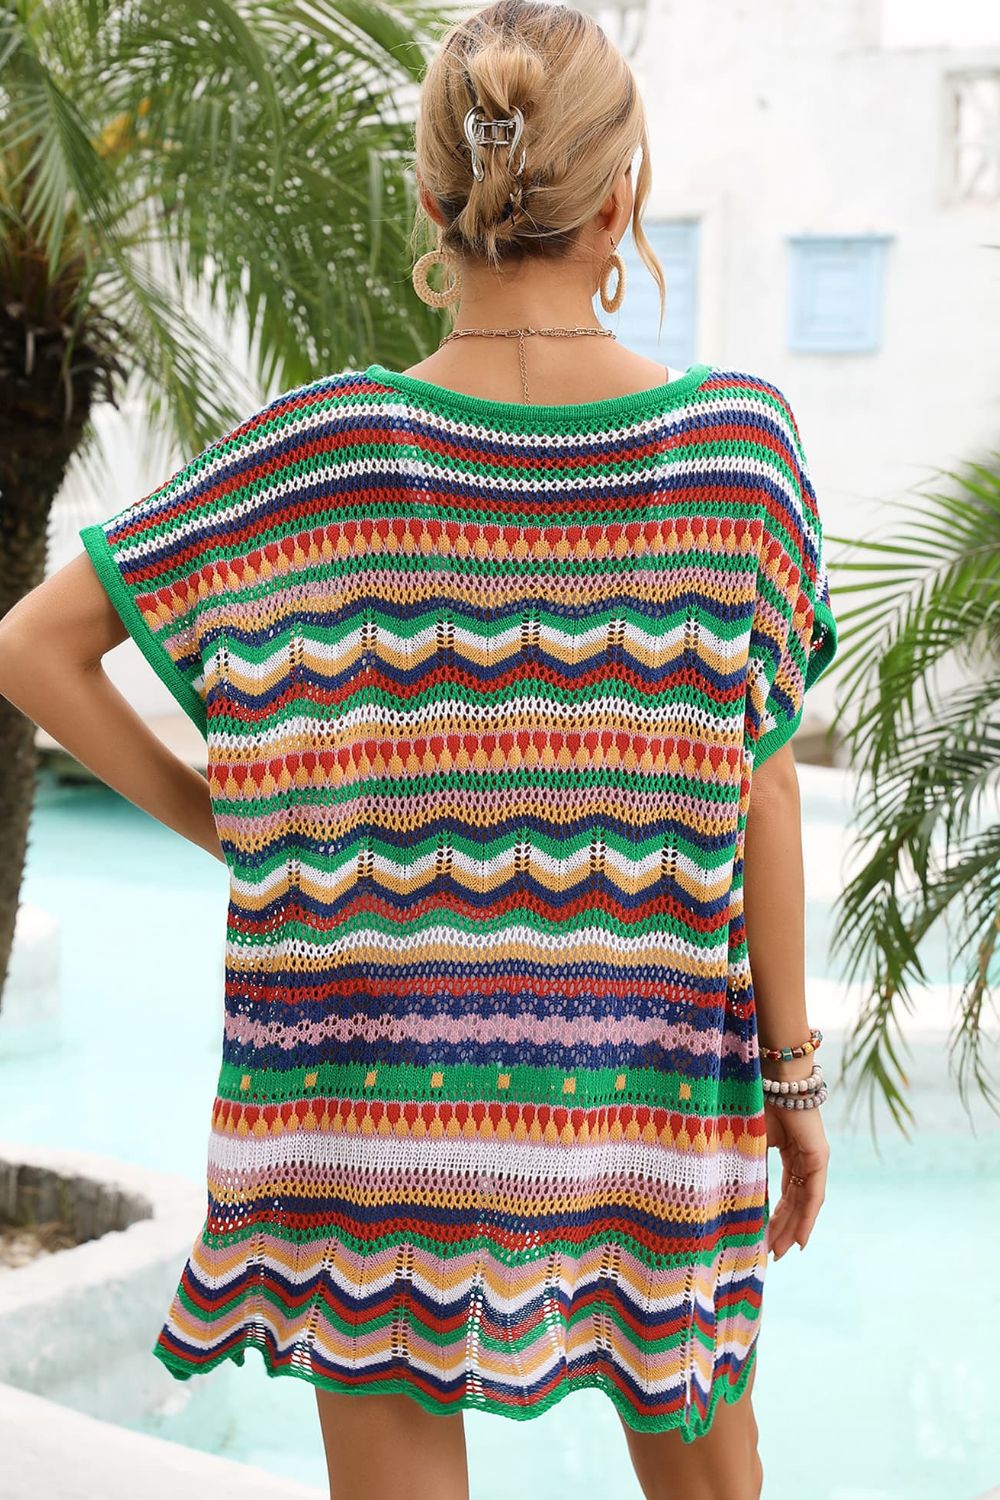 Rainbow Stripe Scalloped V-Neck Cover-Up Dress - Sun of the Beach Boutique